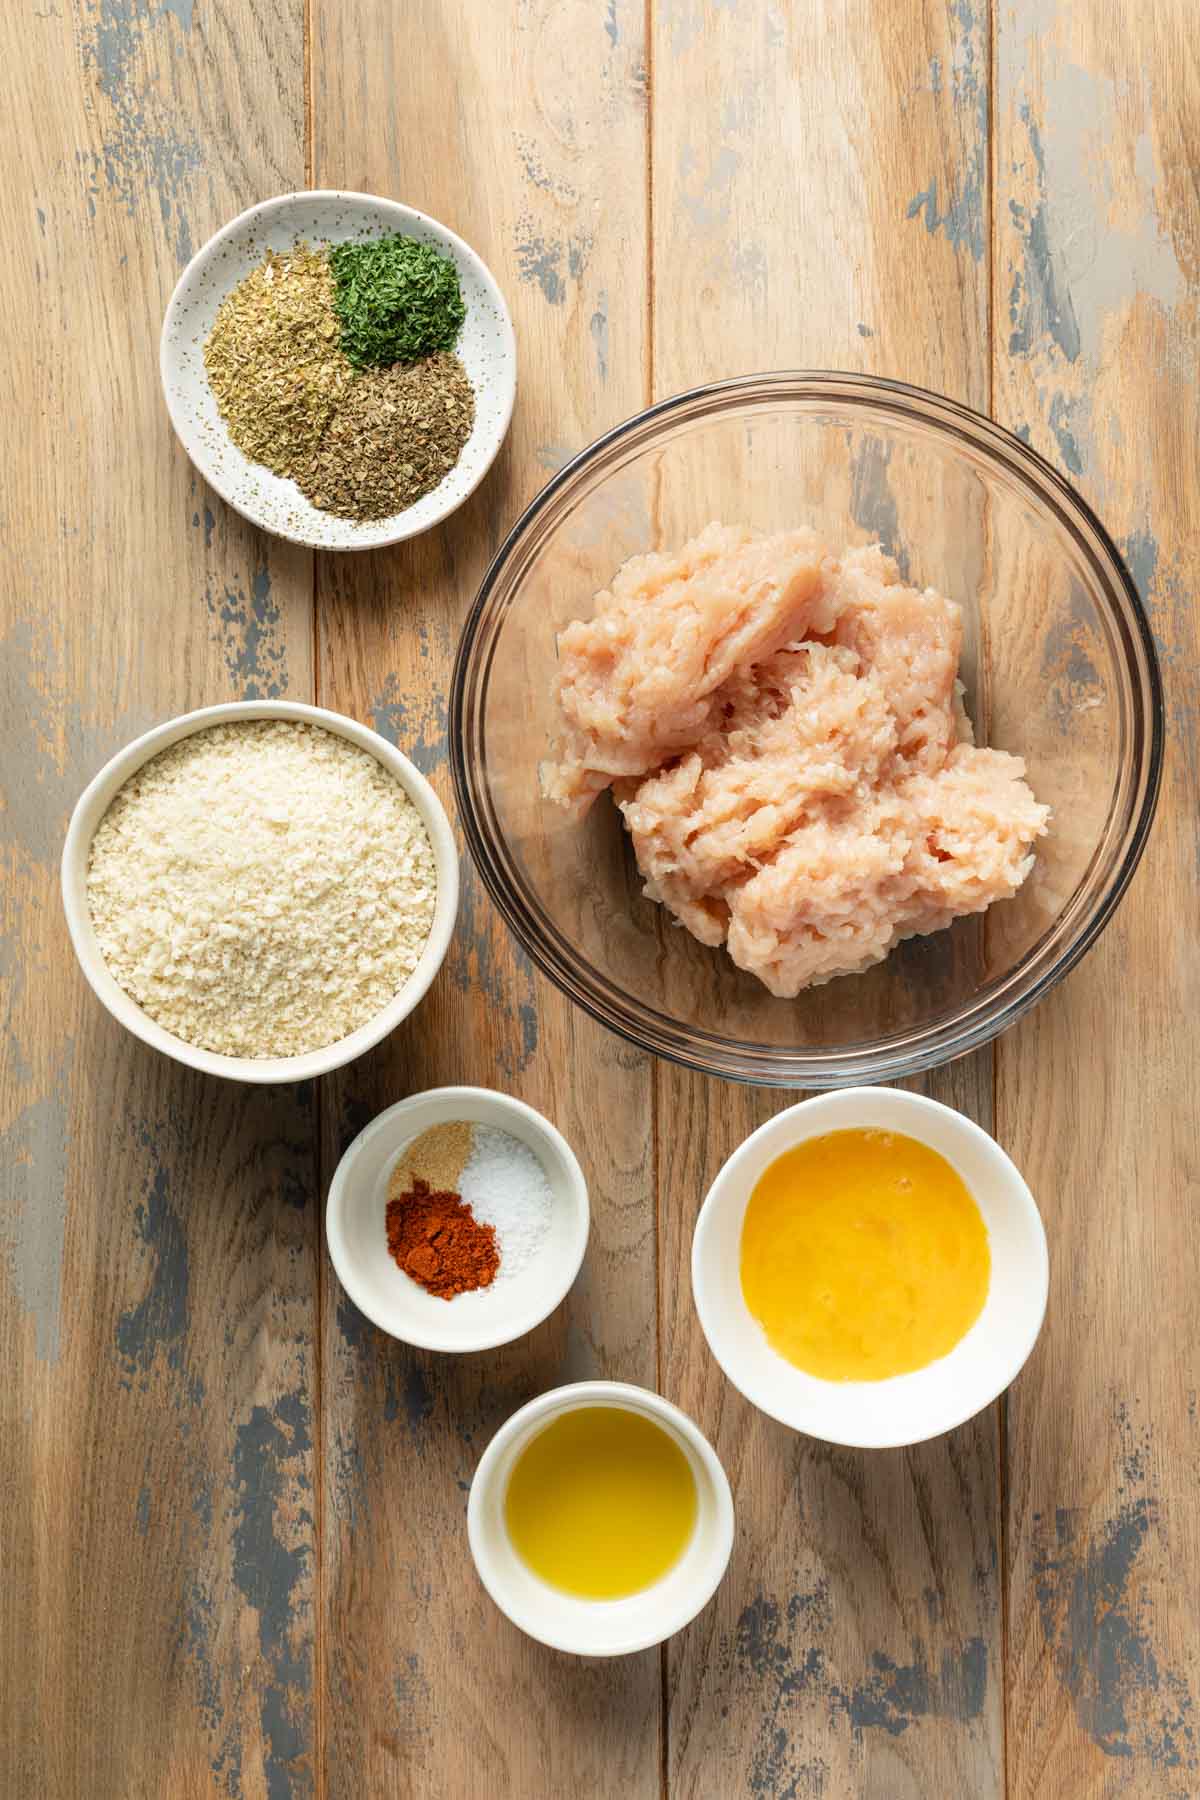 Ingredients to make air fryer chicken patties arranged individually on a wooden surface.